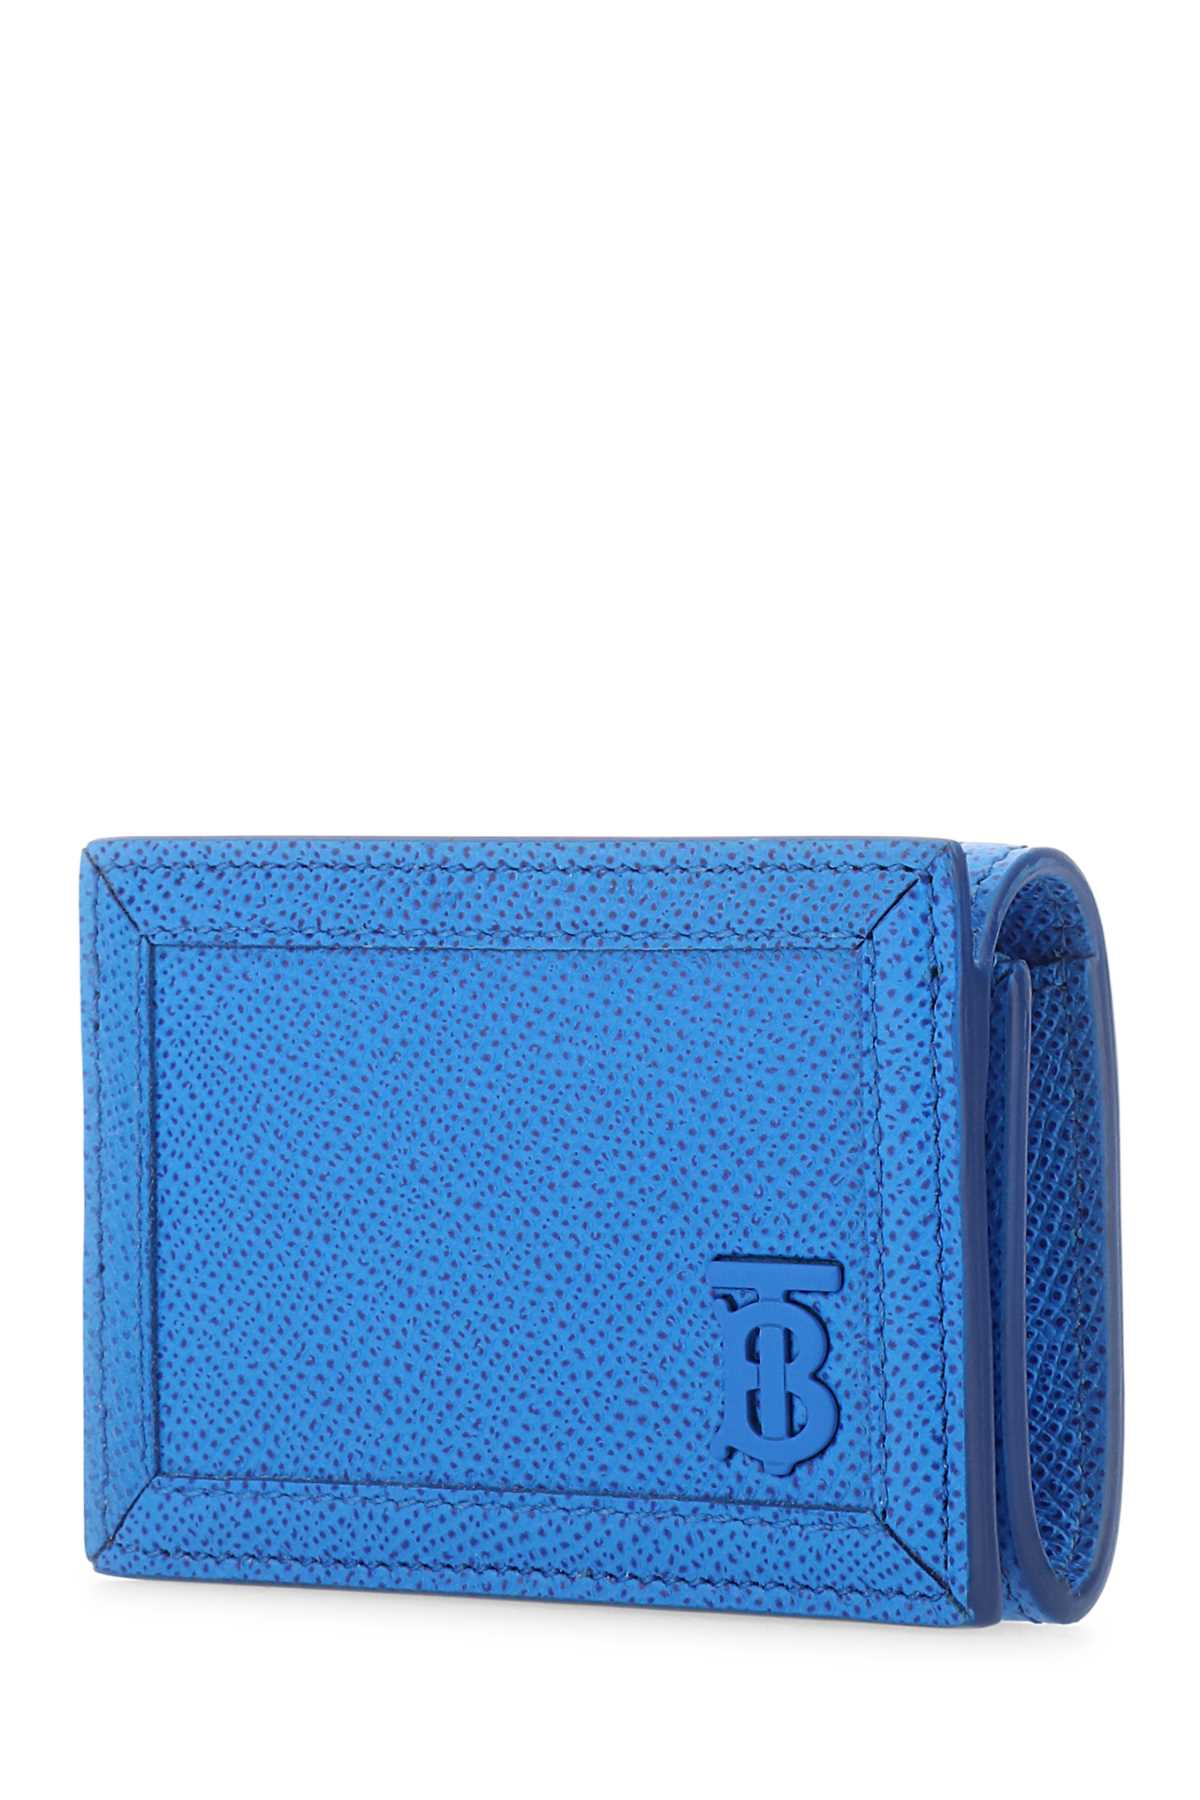 Burberry Turquoise Leather Card Holder In Vividblue